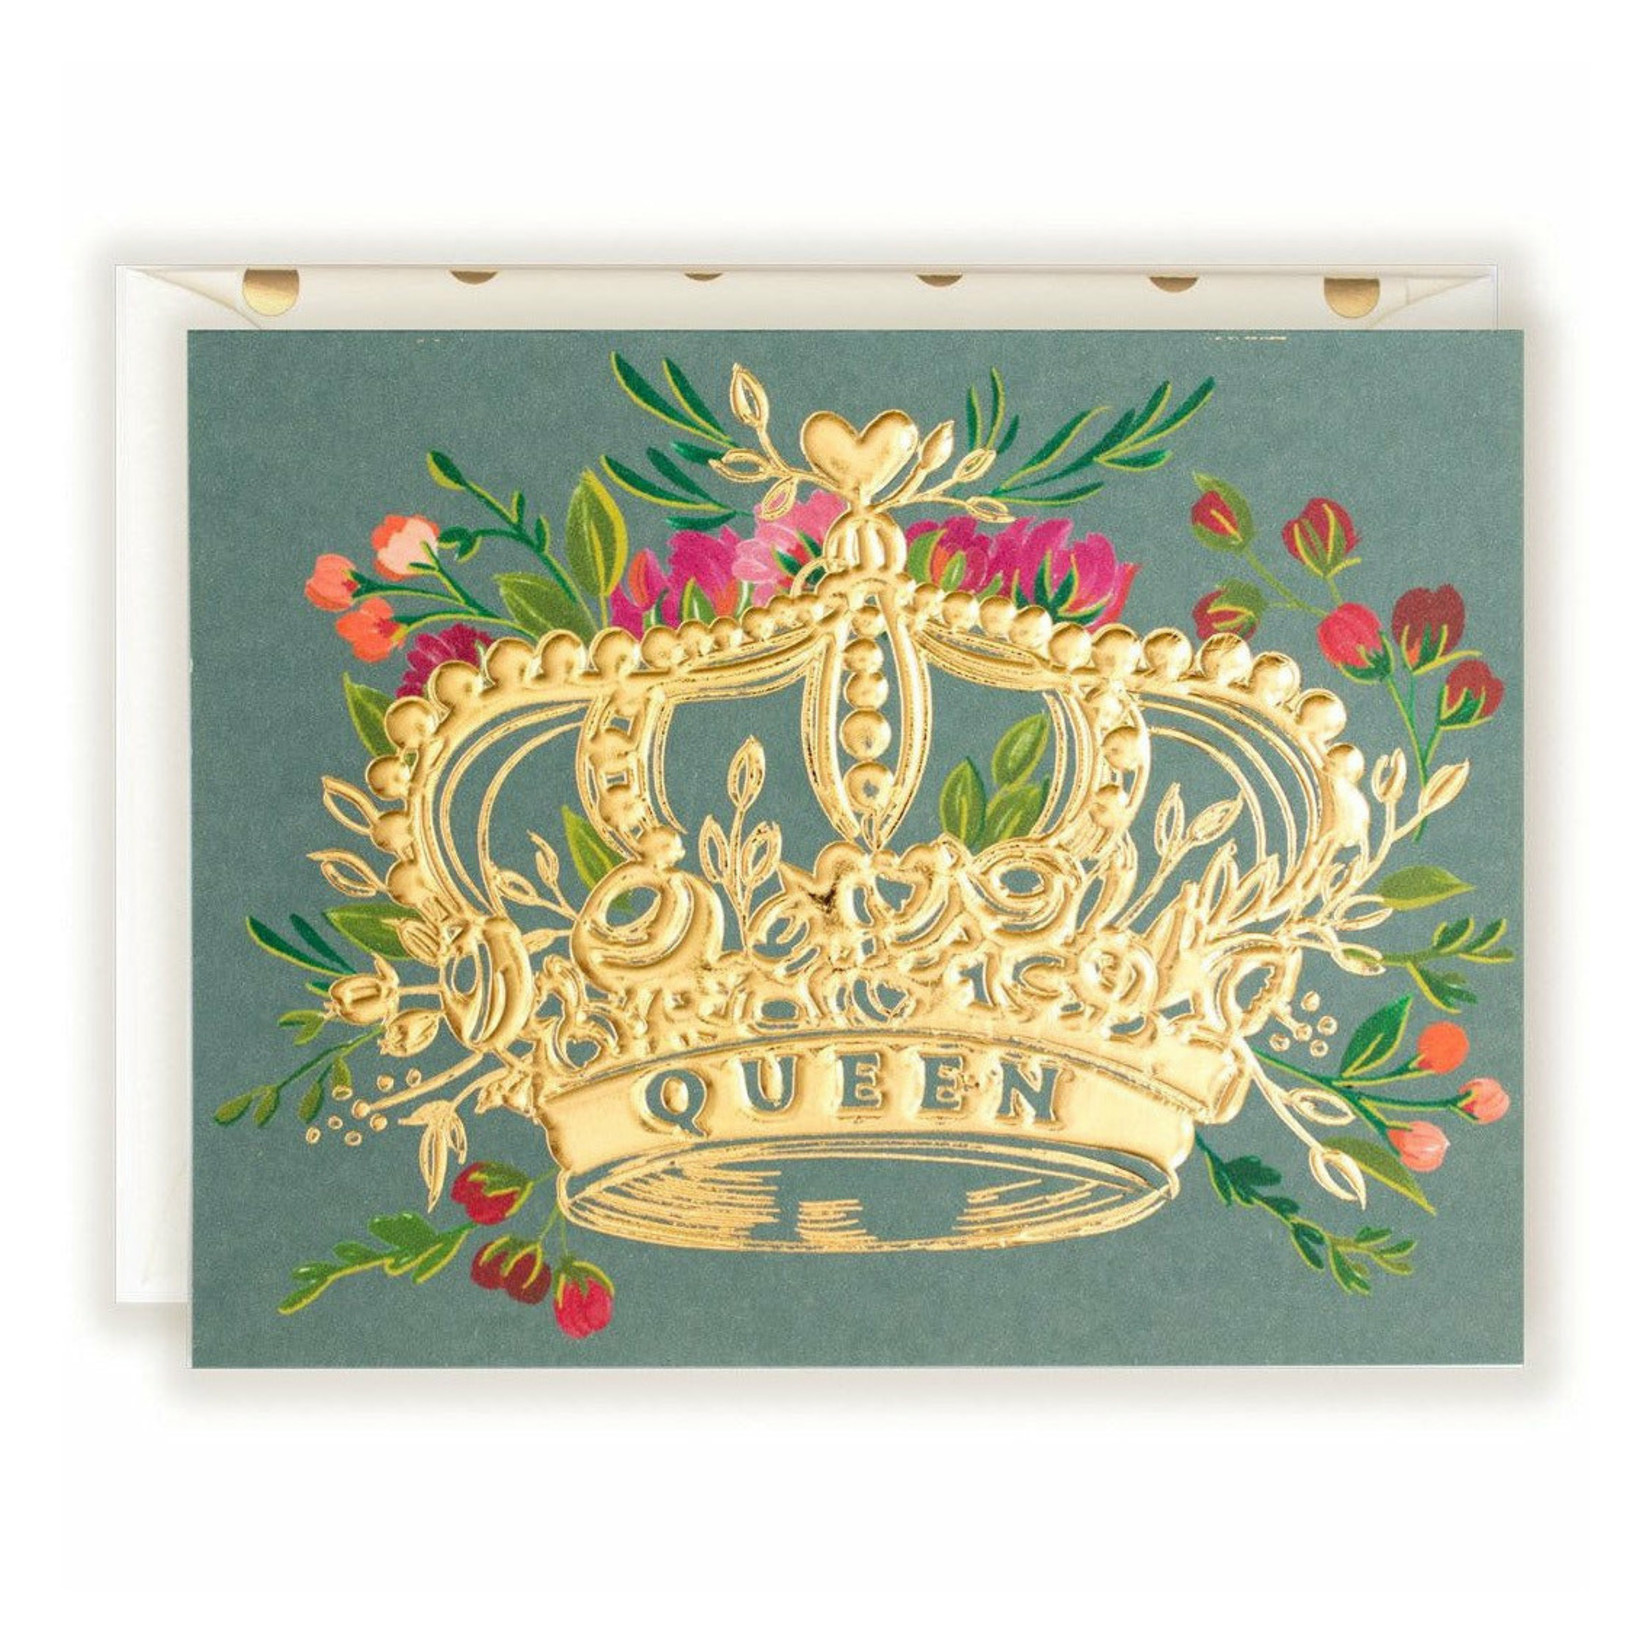 The First Snow Queen Gold Foil Crown Card